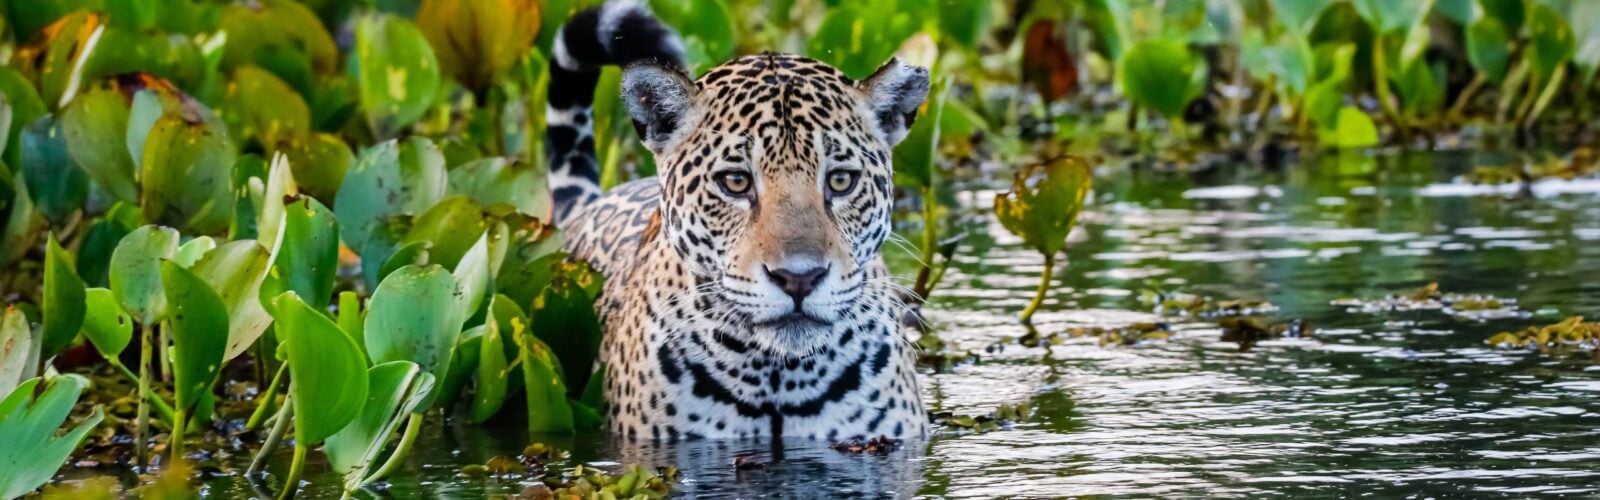 Close up of a young Jaguar standing in shallow water with reflections, bed of water hyacinths in the back and side at dawn in the Pantanal Wetlands, Mato Grosso, Brazil